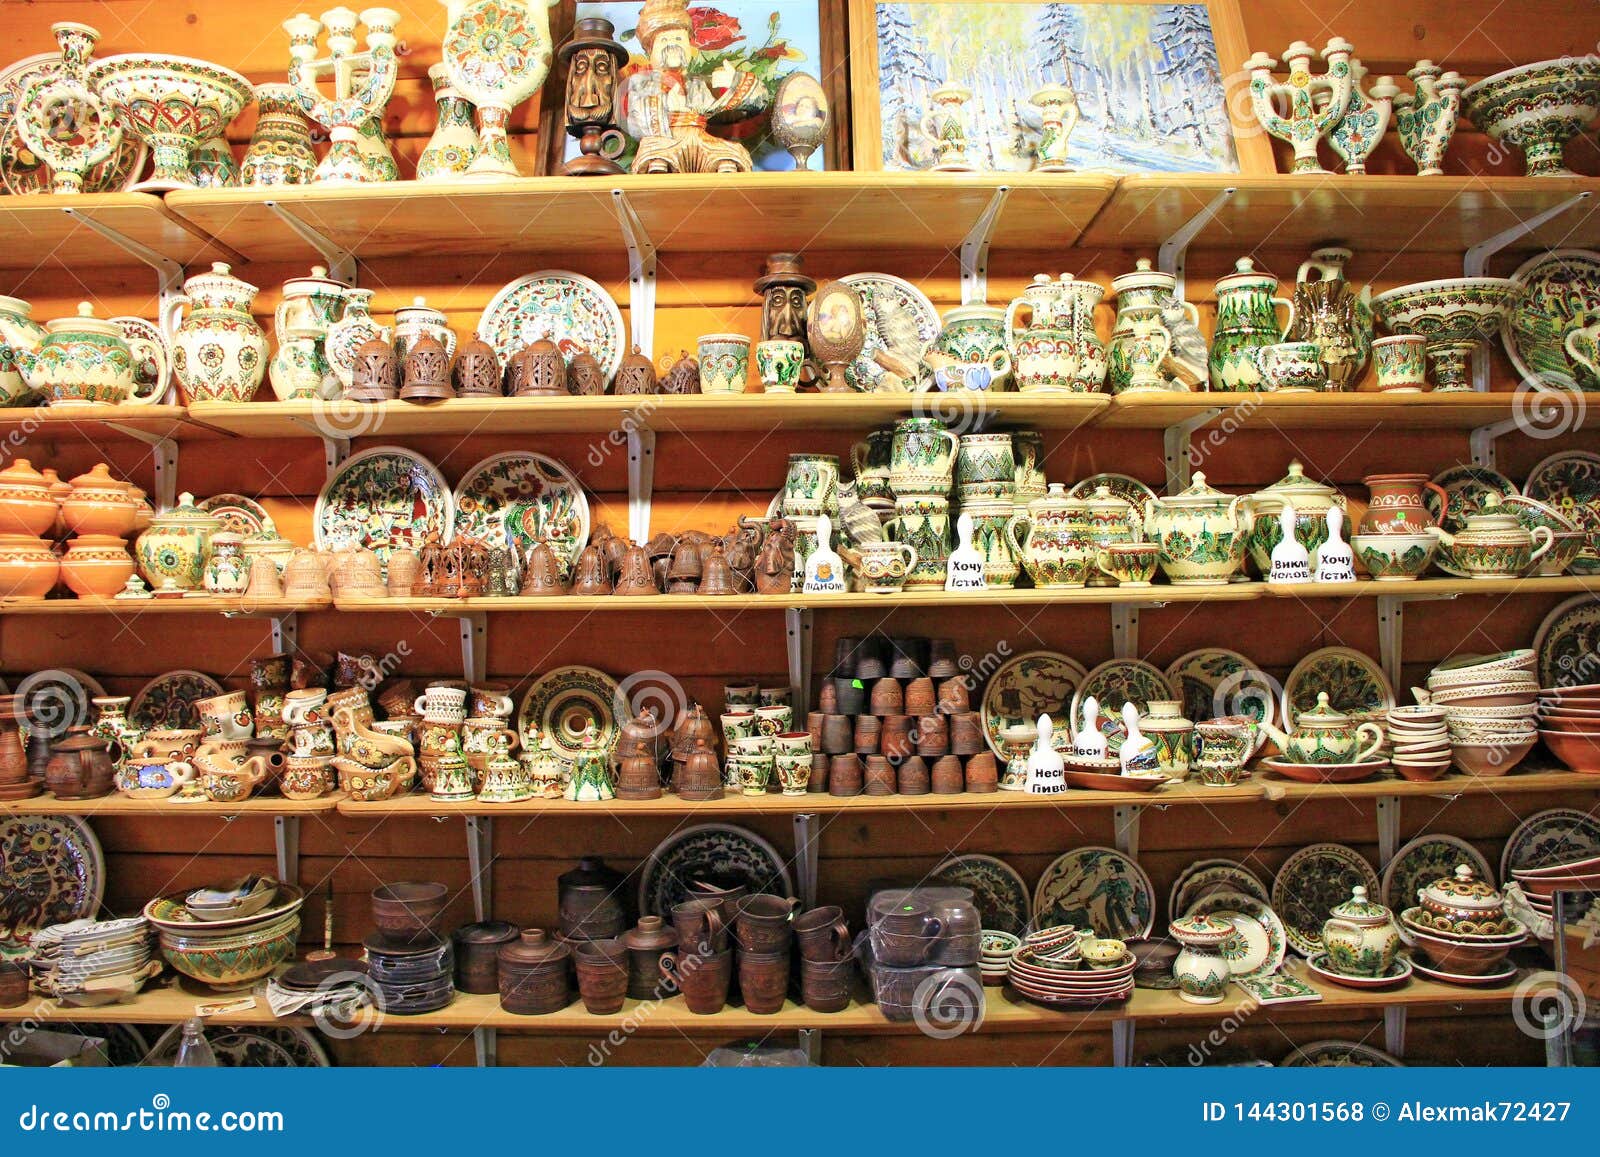 Products Of Ceramics On Sale In Shop. Handicraft Of Making Pottery